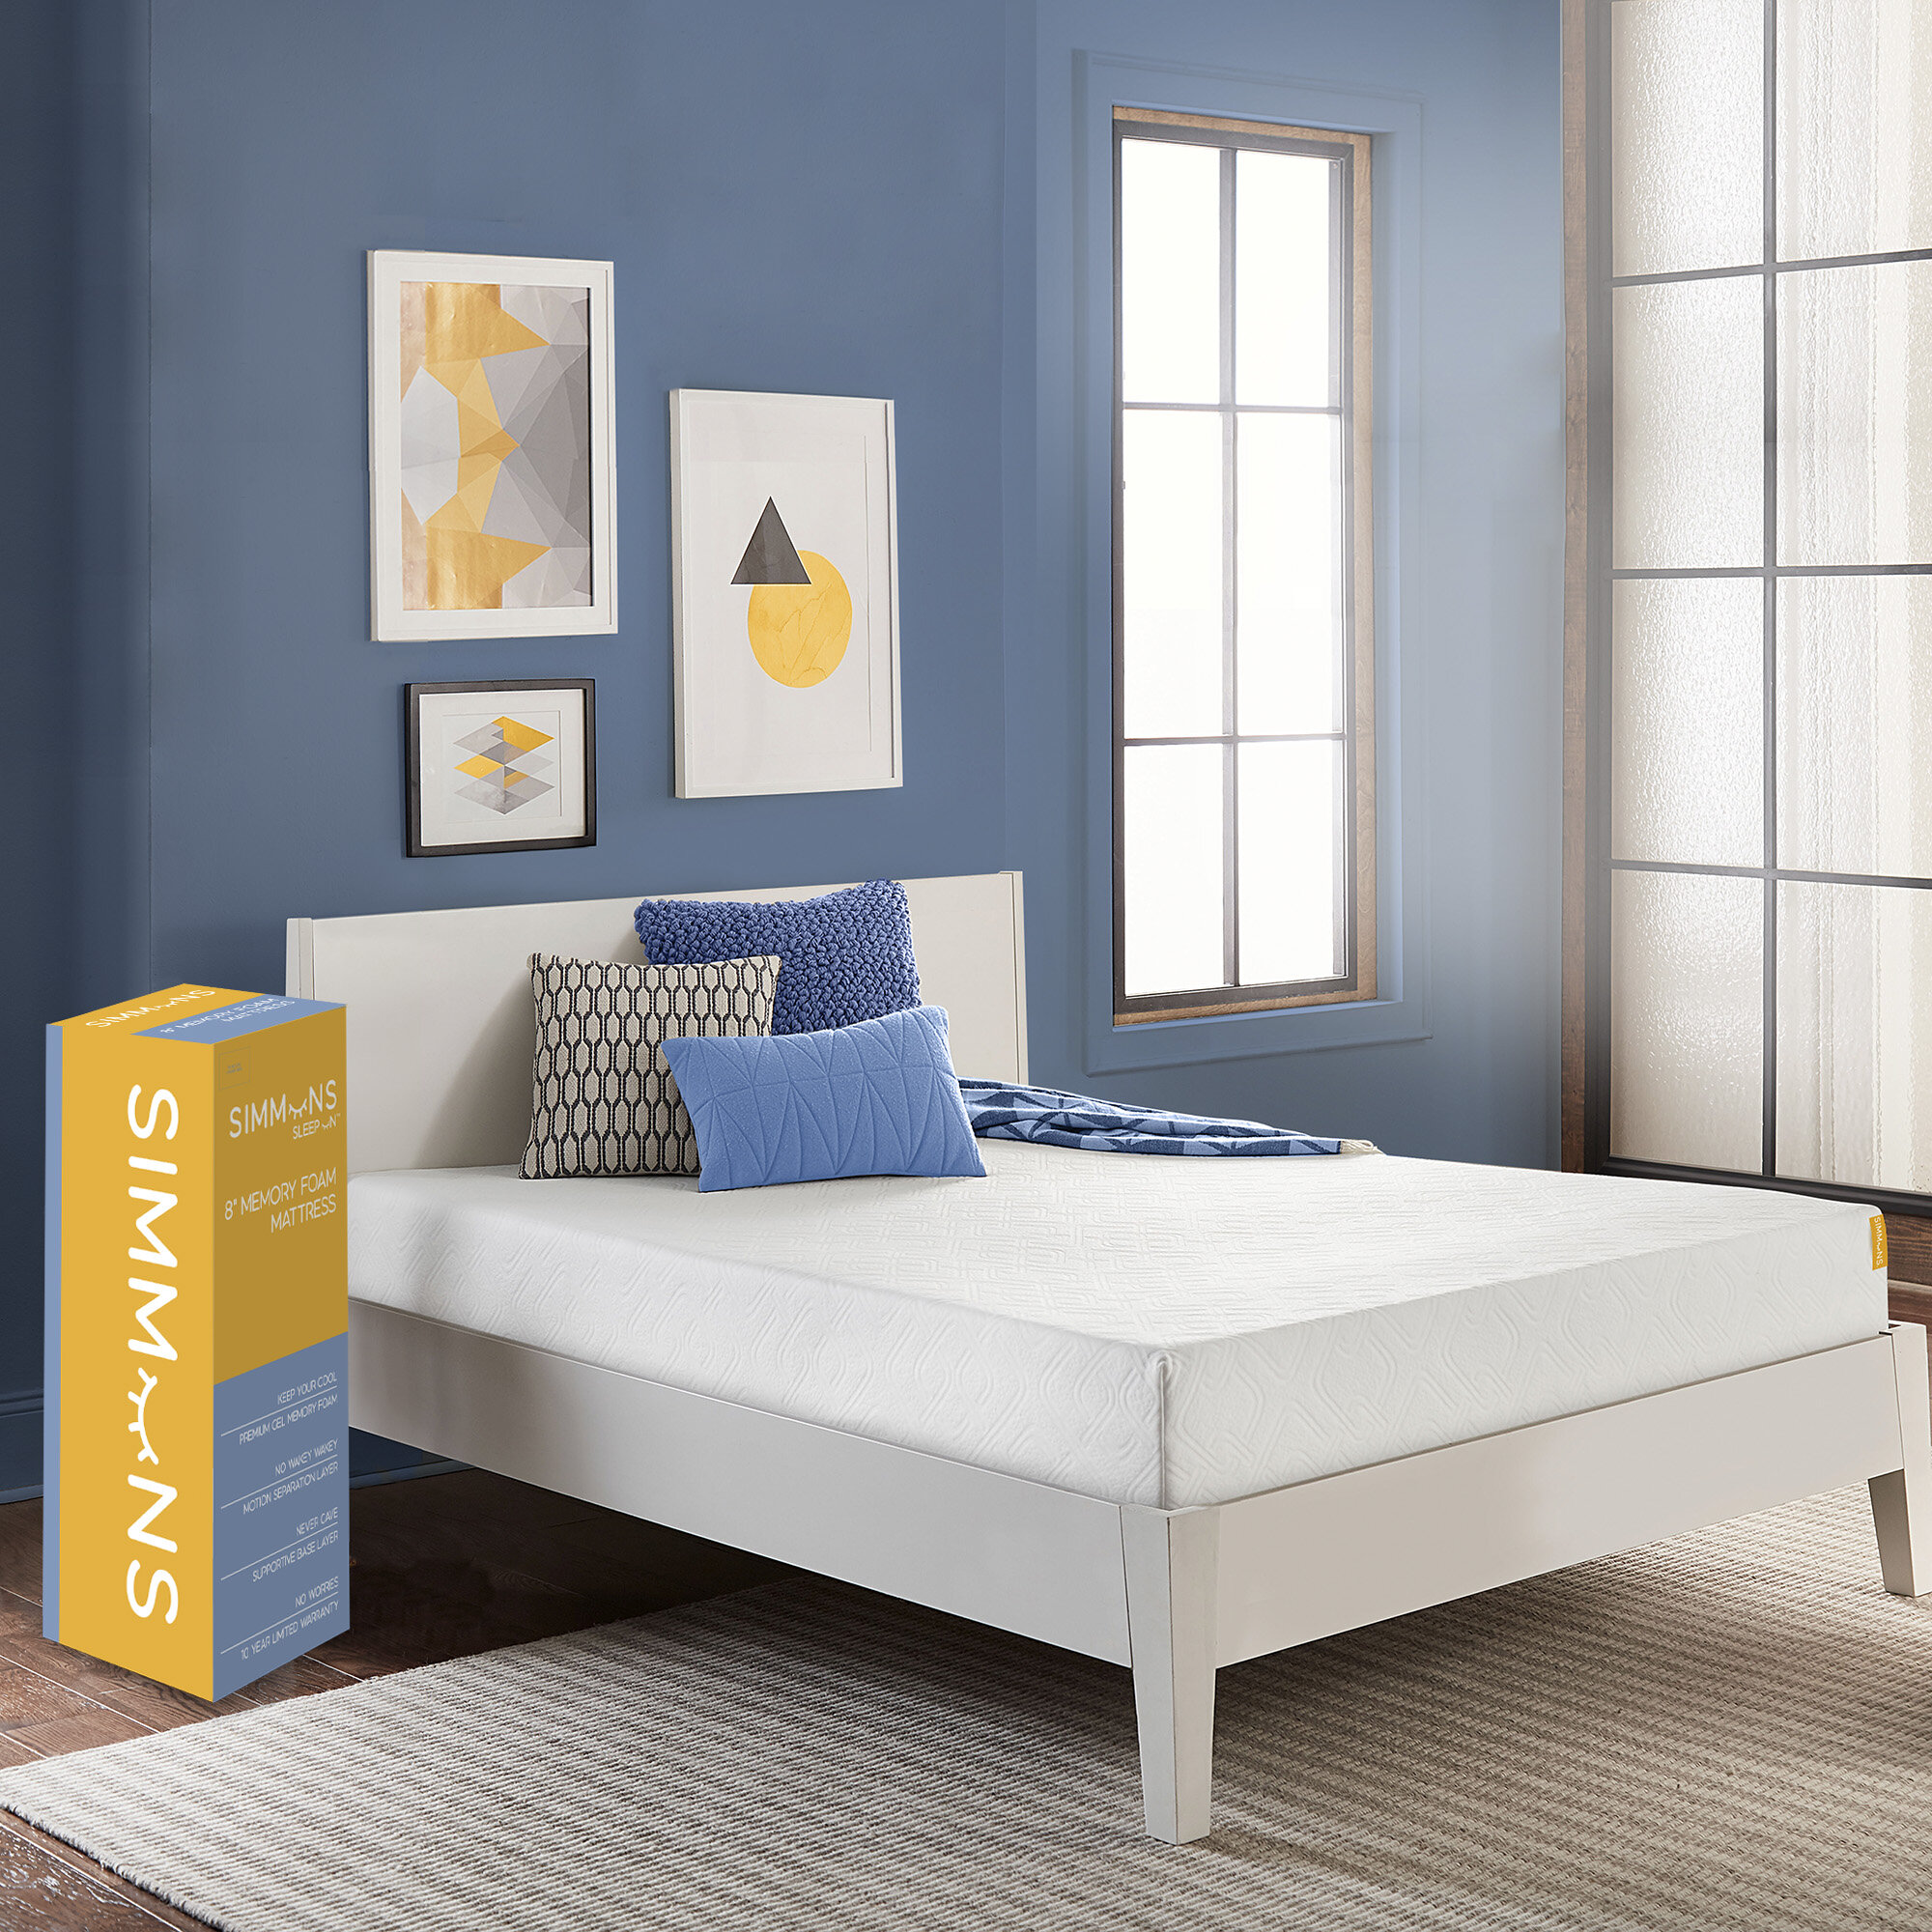 Memory Foam Mattress No Springs 6" or 8" thickness ALL SIZES AVAILABLE 